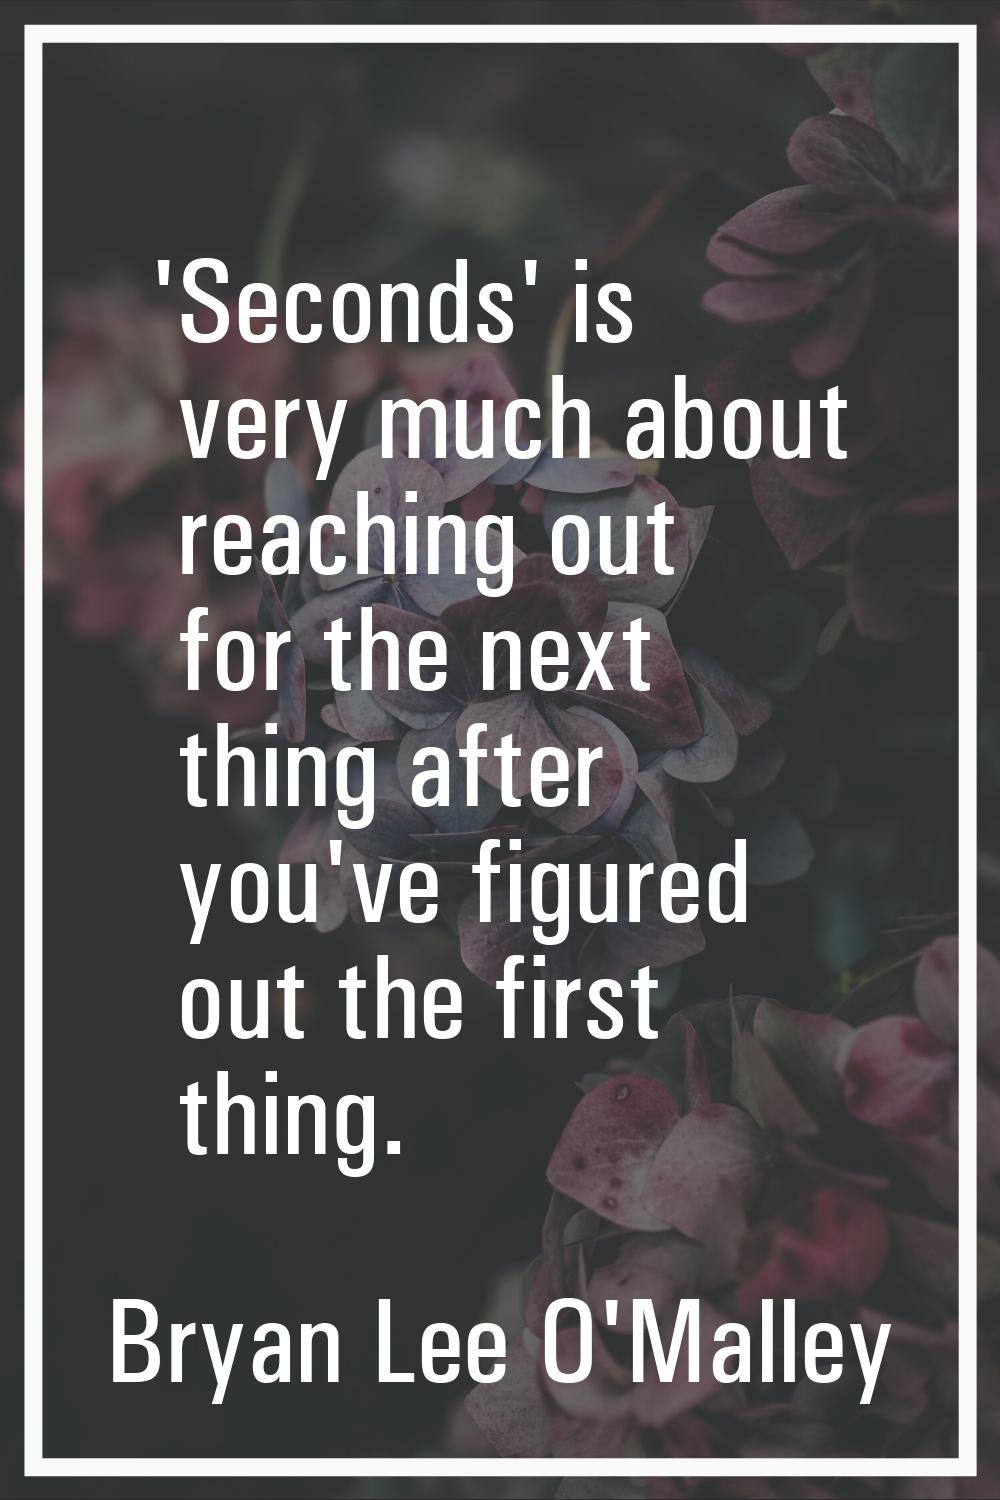 'Seconds' is very much about reaching out for the next thing after you've figured out the first thi